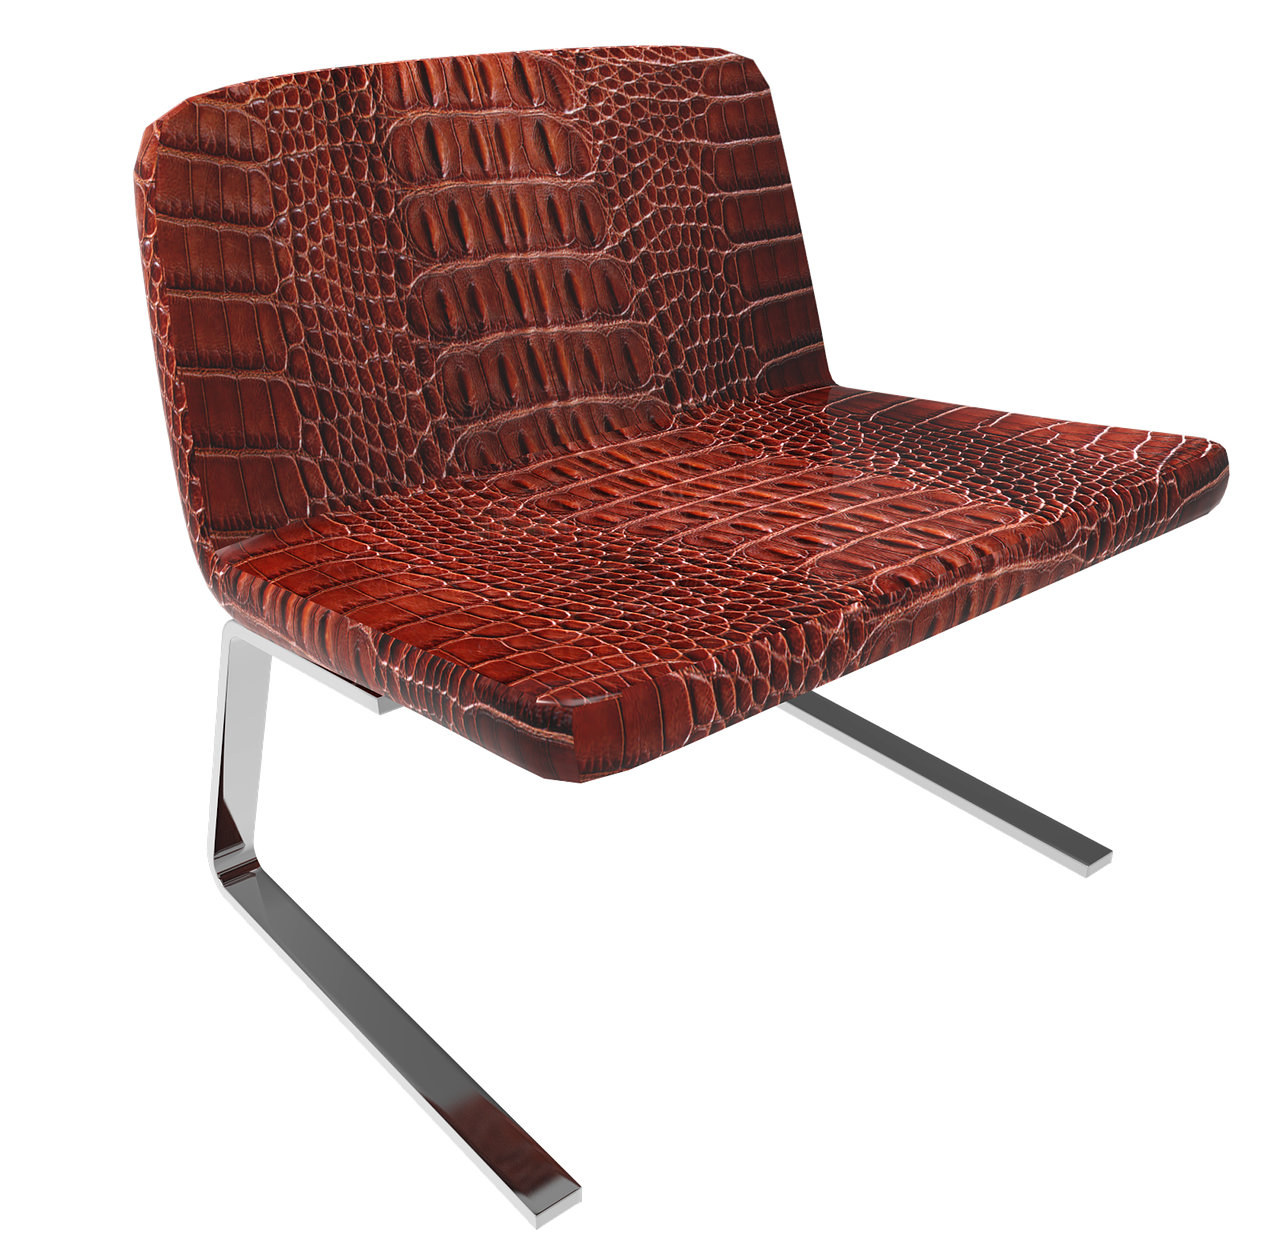 chair 3d render free photo